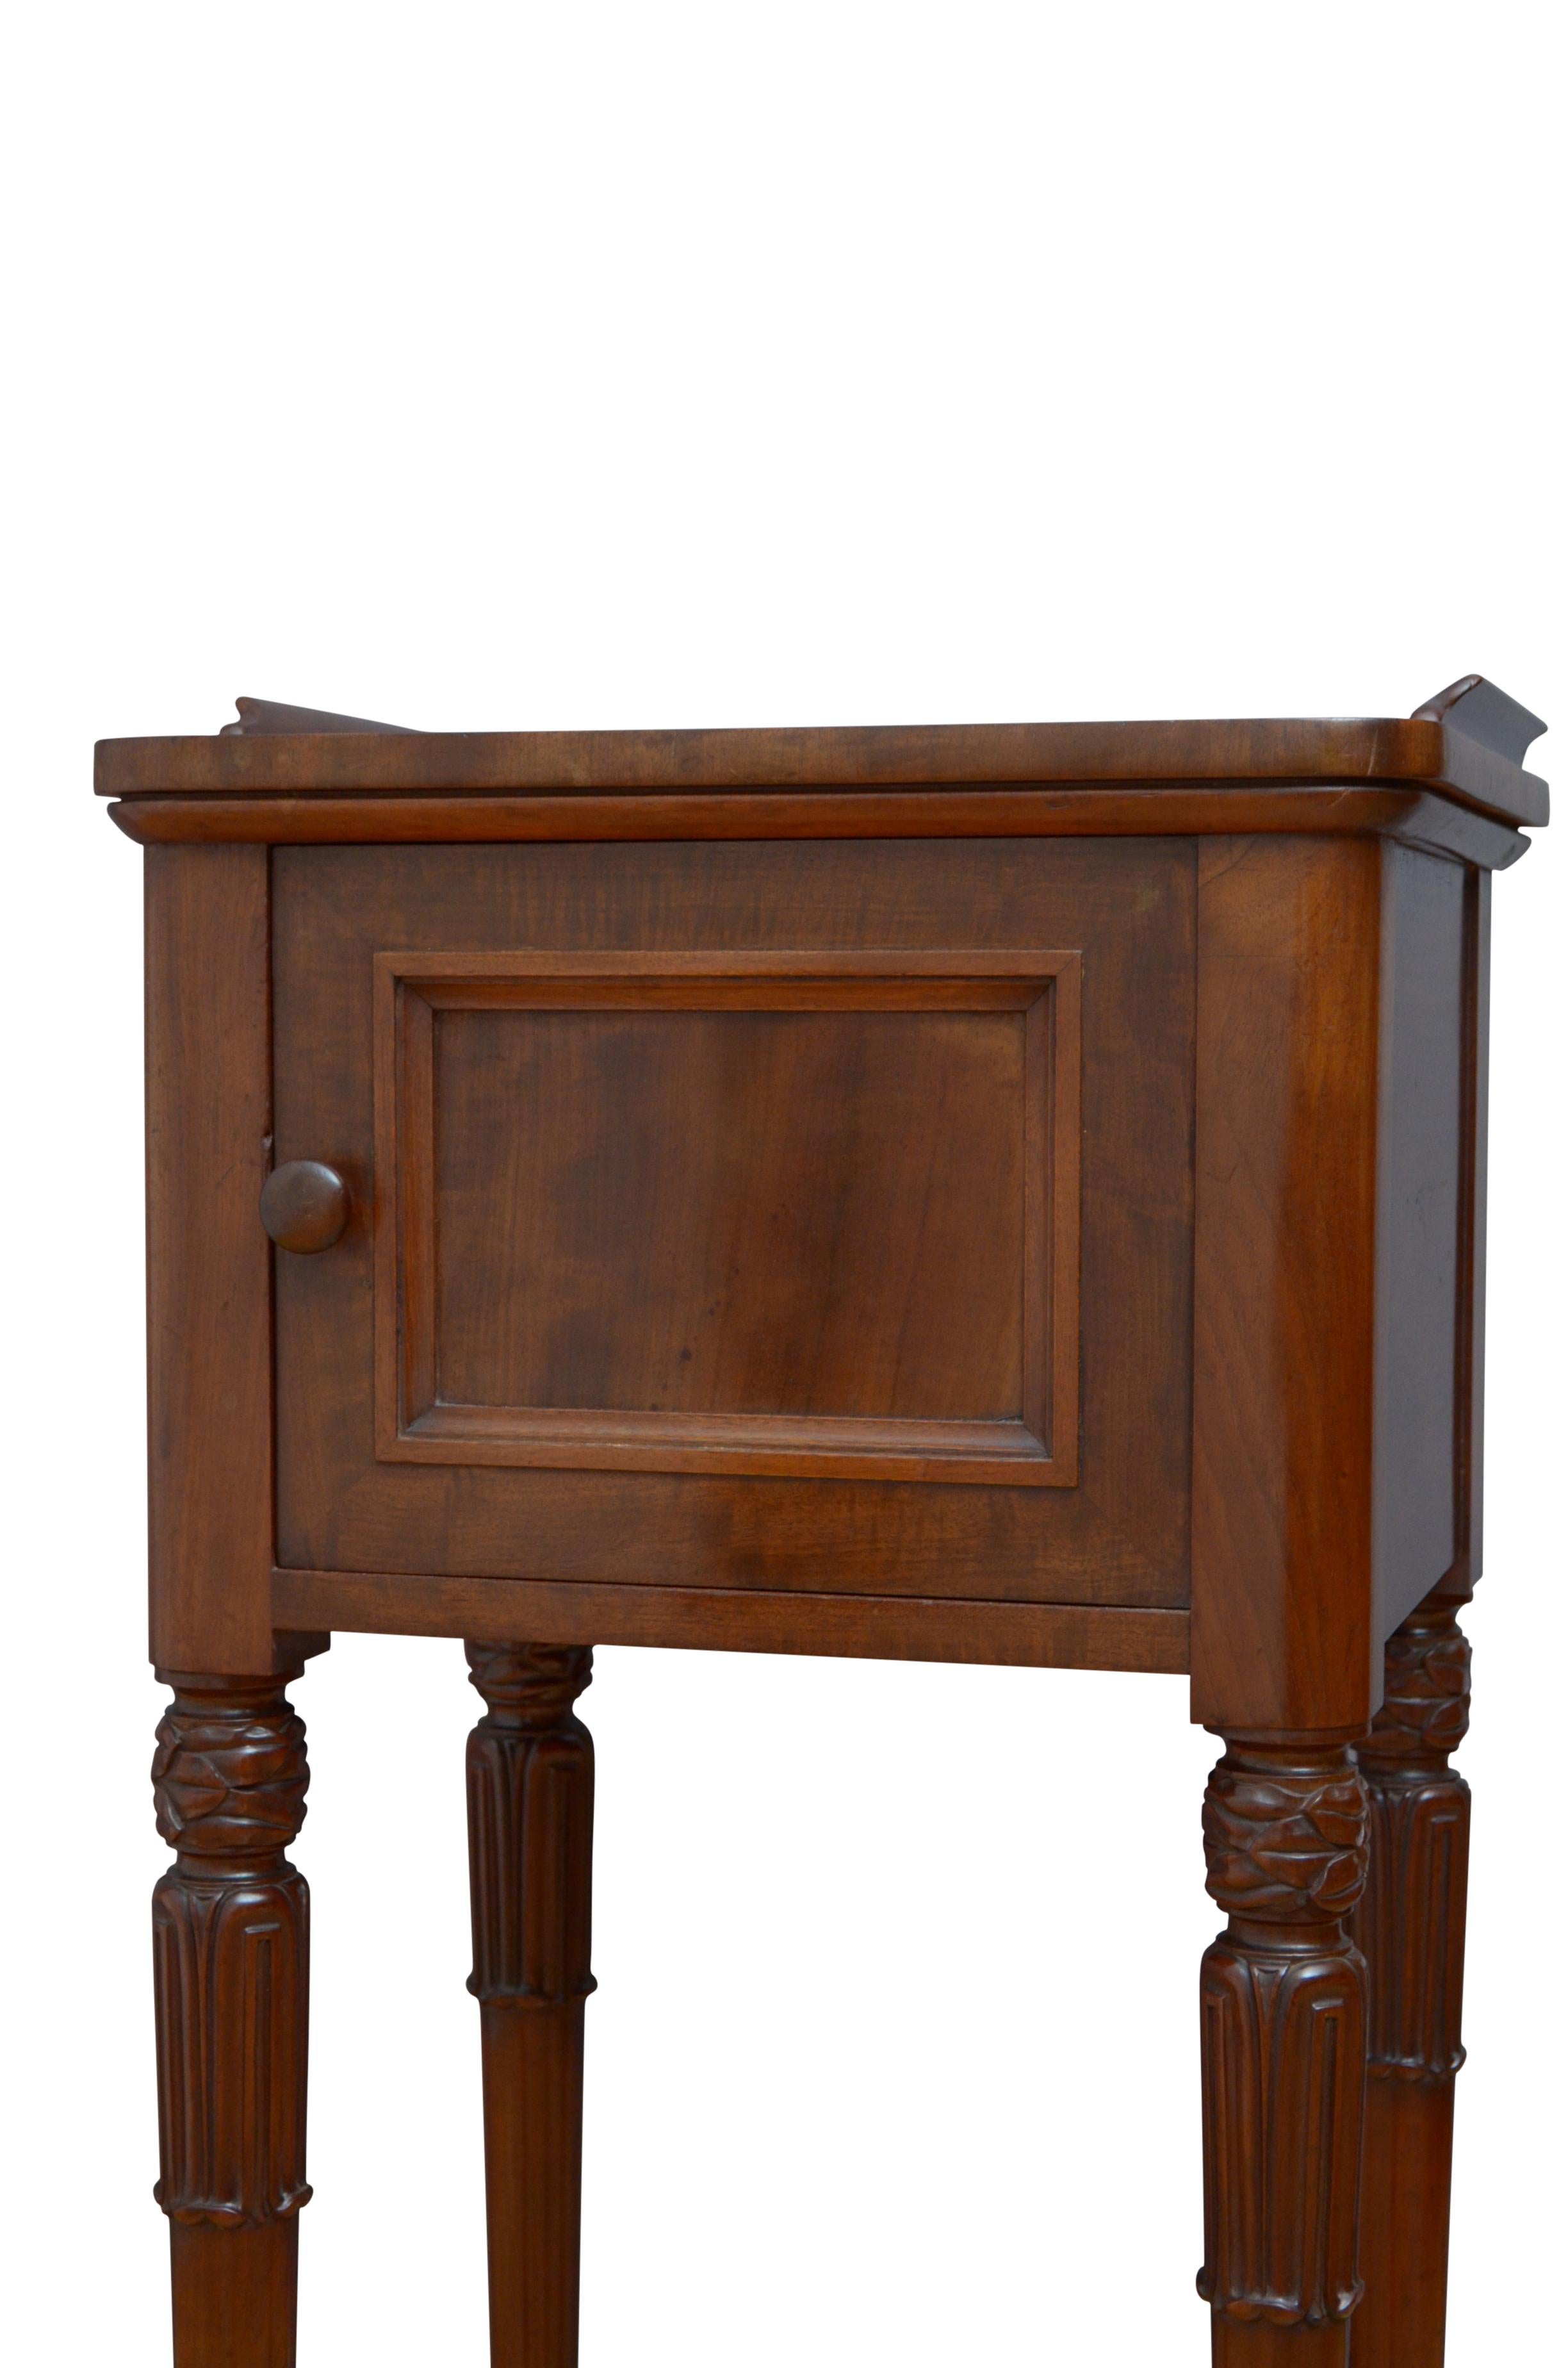 William IV Mahogany Bedside Cabinet In Good Condition For Sale In Whaley Bridge, GB